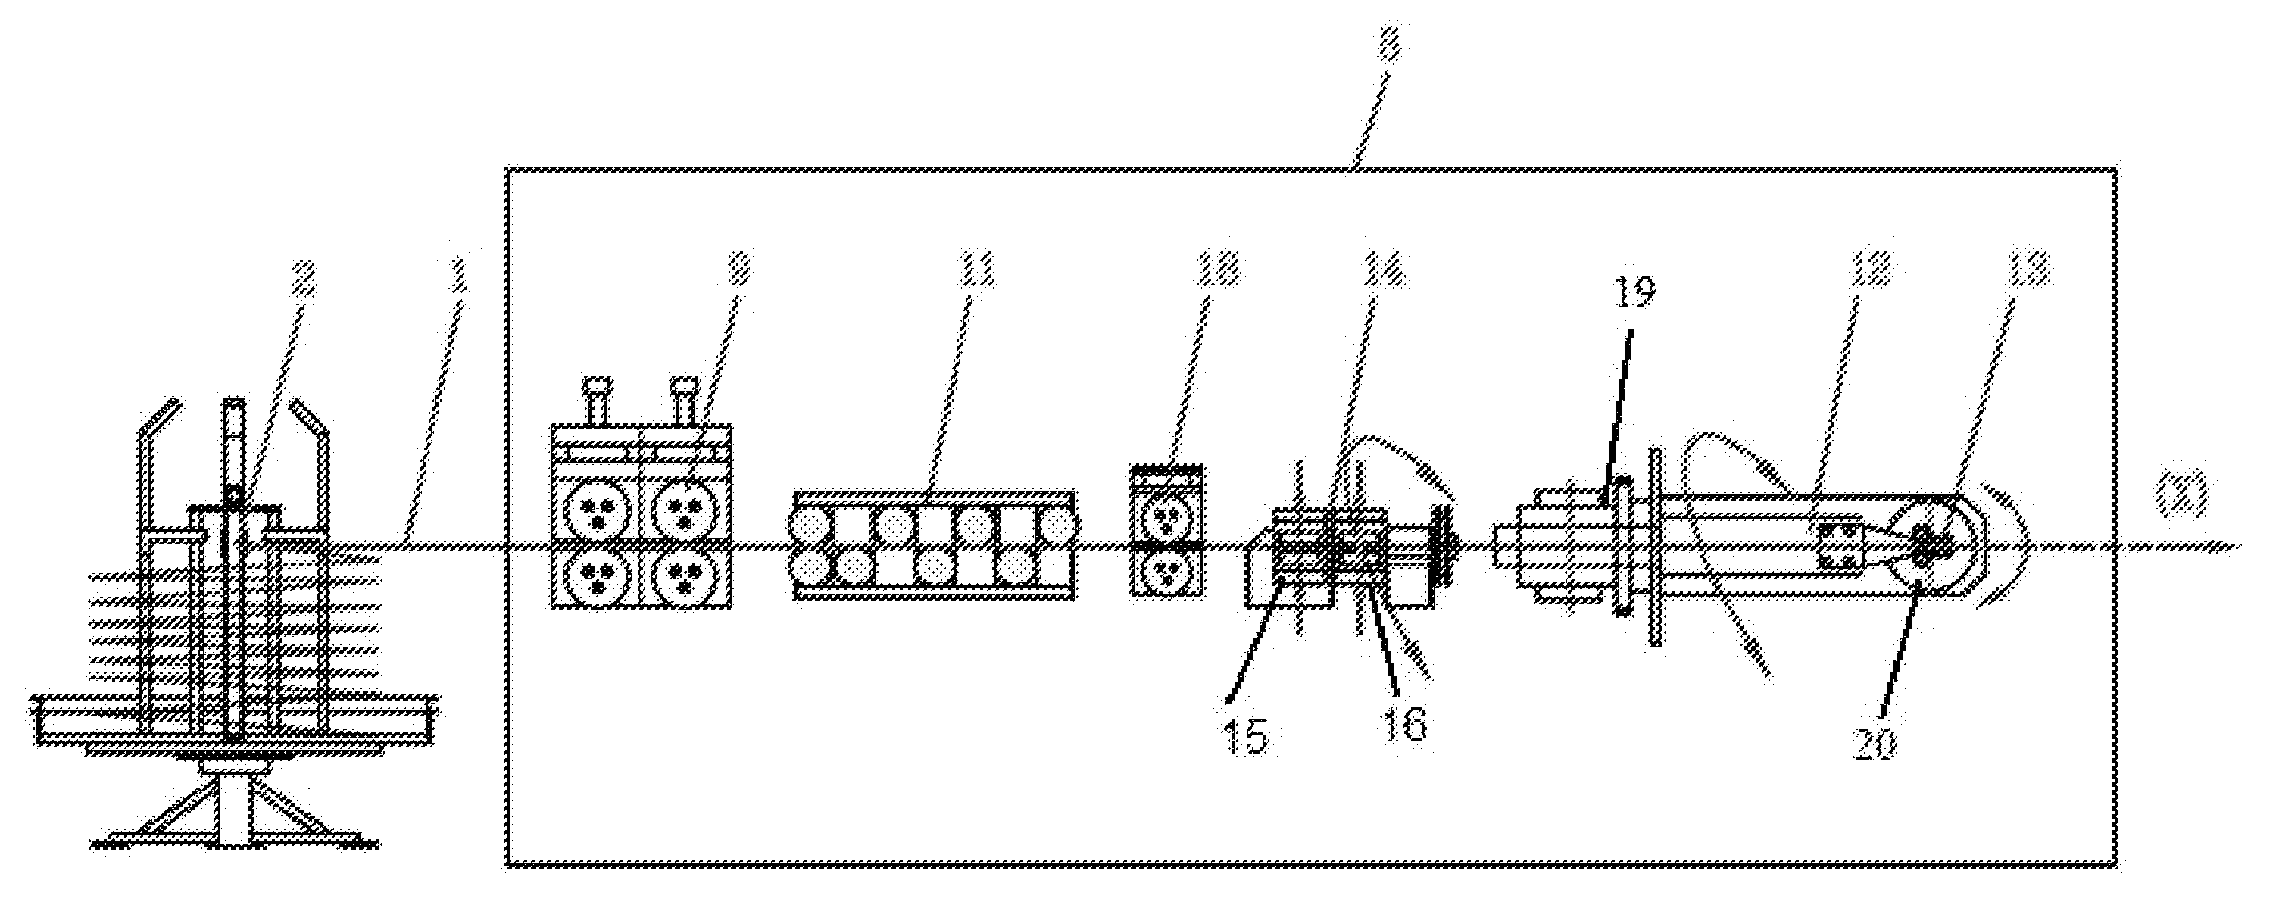 System and process for production of three-dimensional products from wire